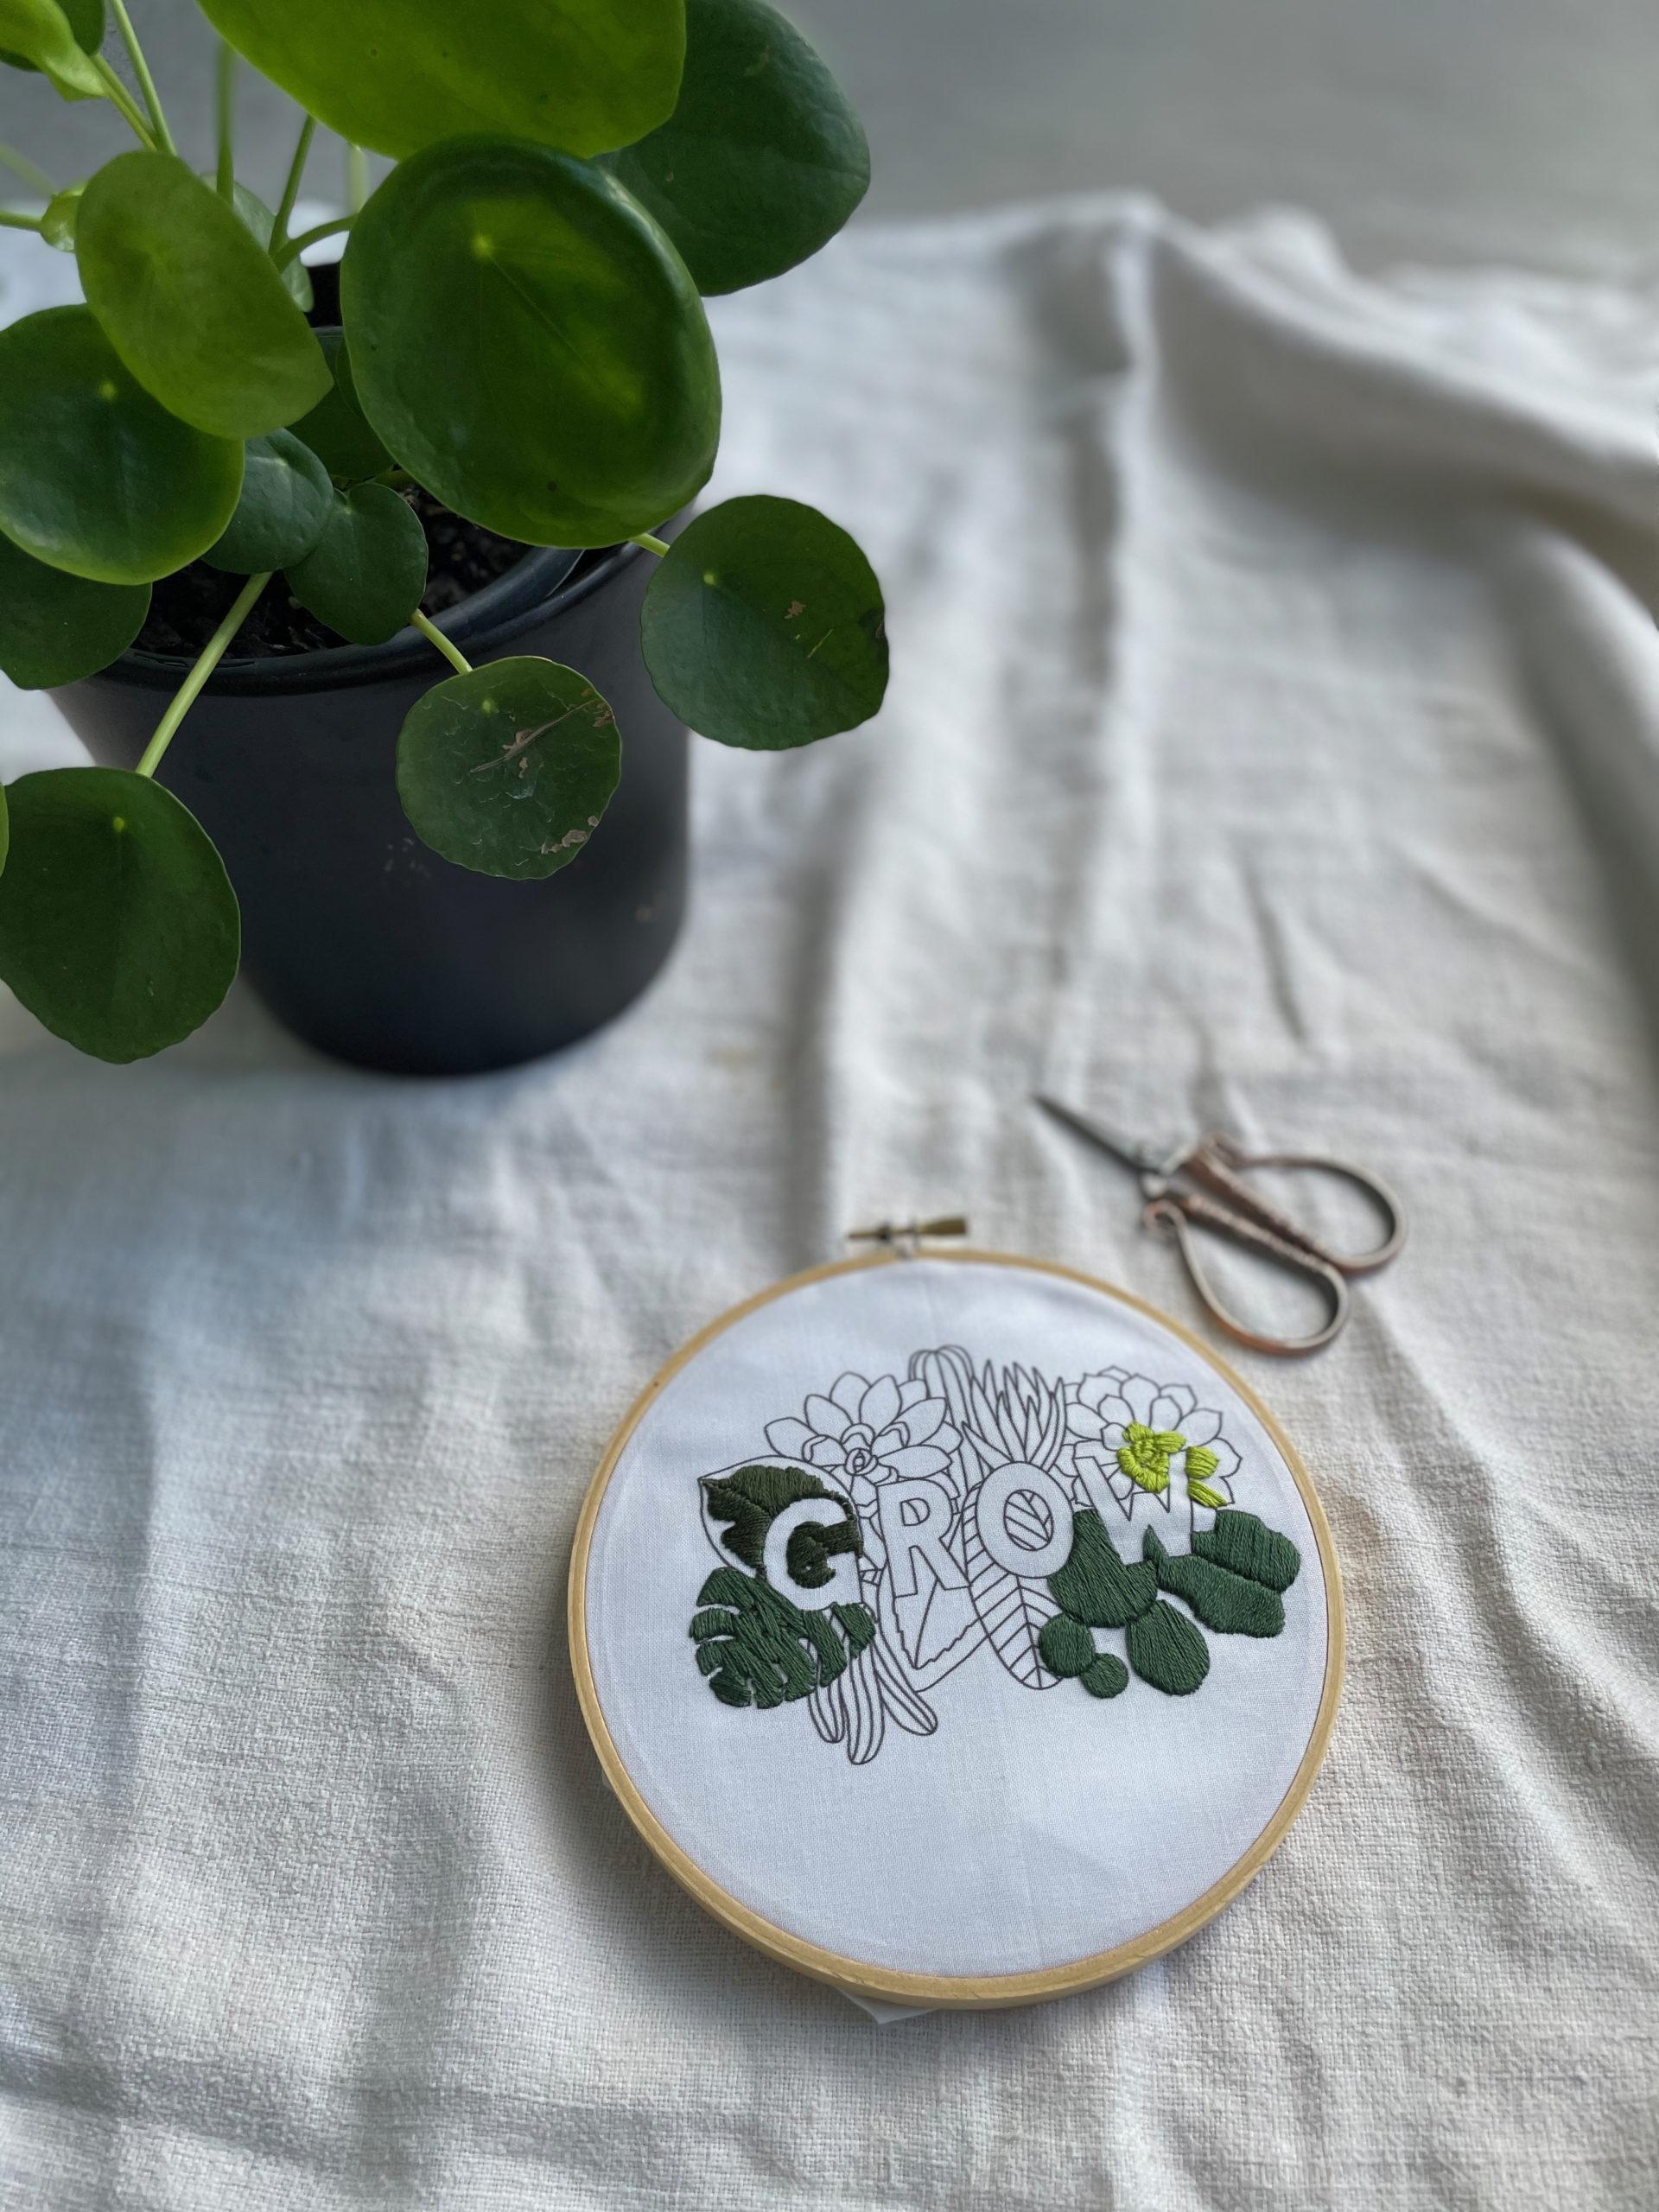 Embroidery with the word Grow, with green theads, in hoop. A plant and scissors are nearby